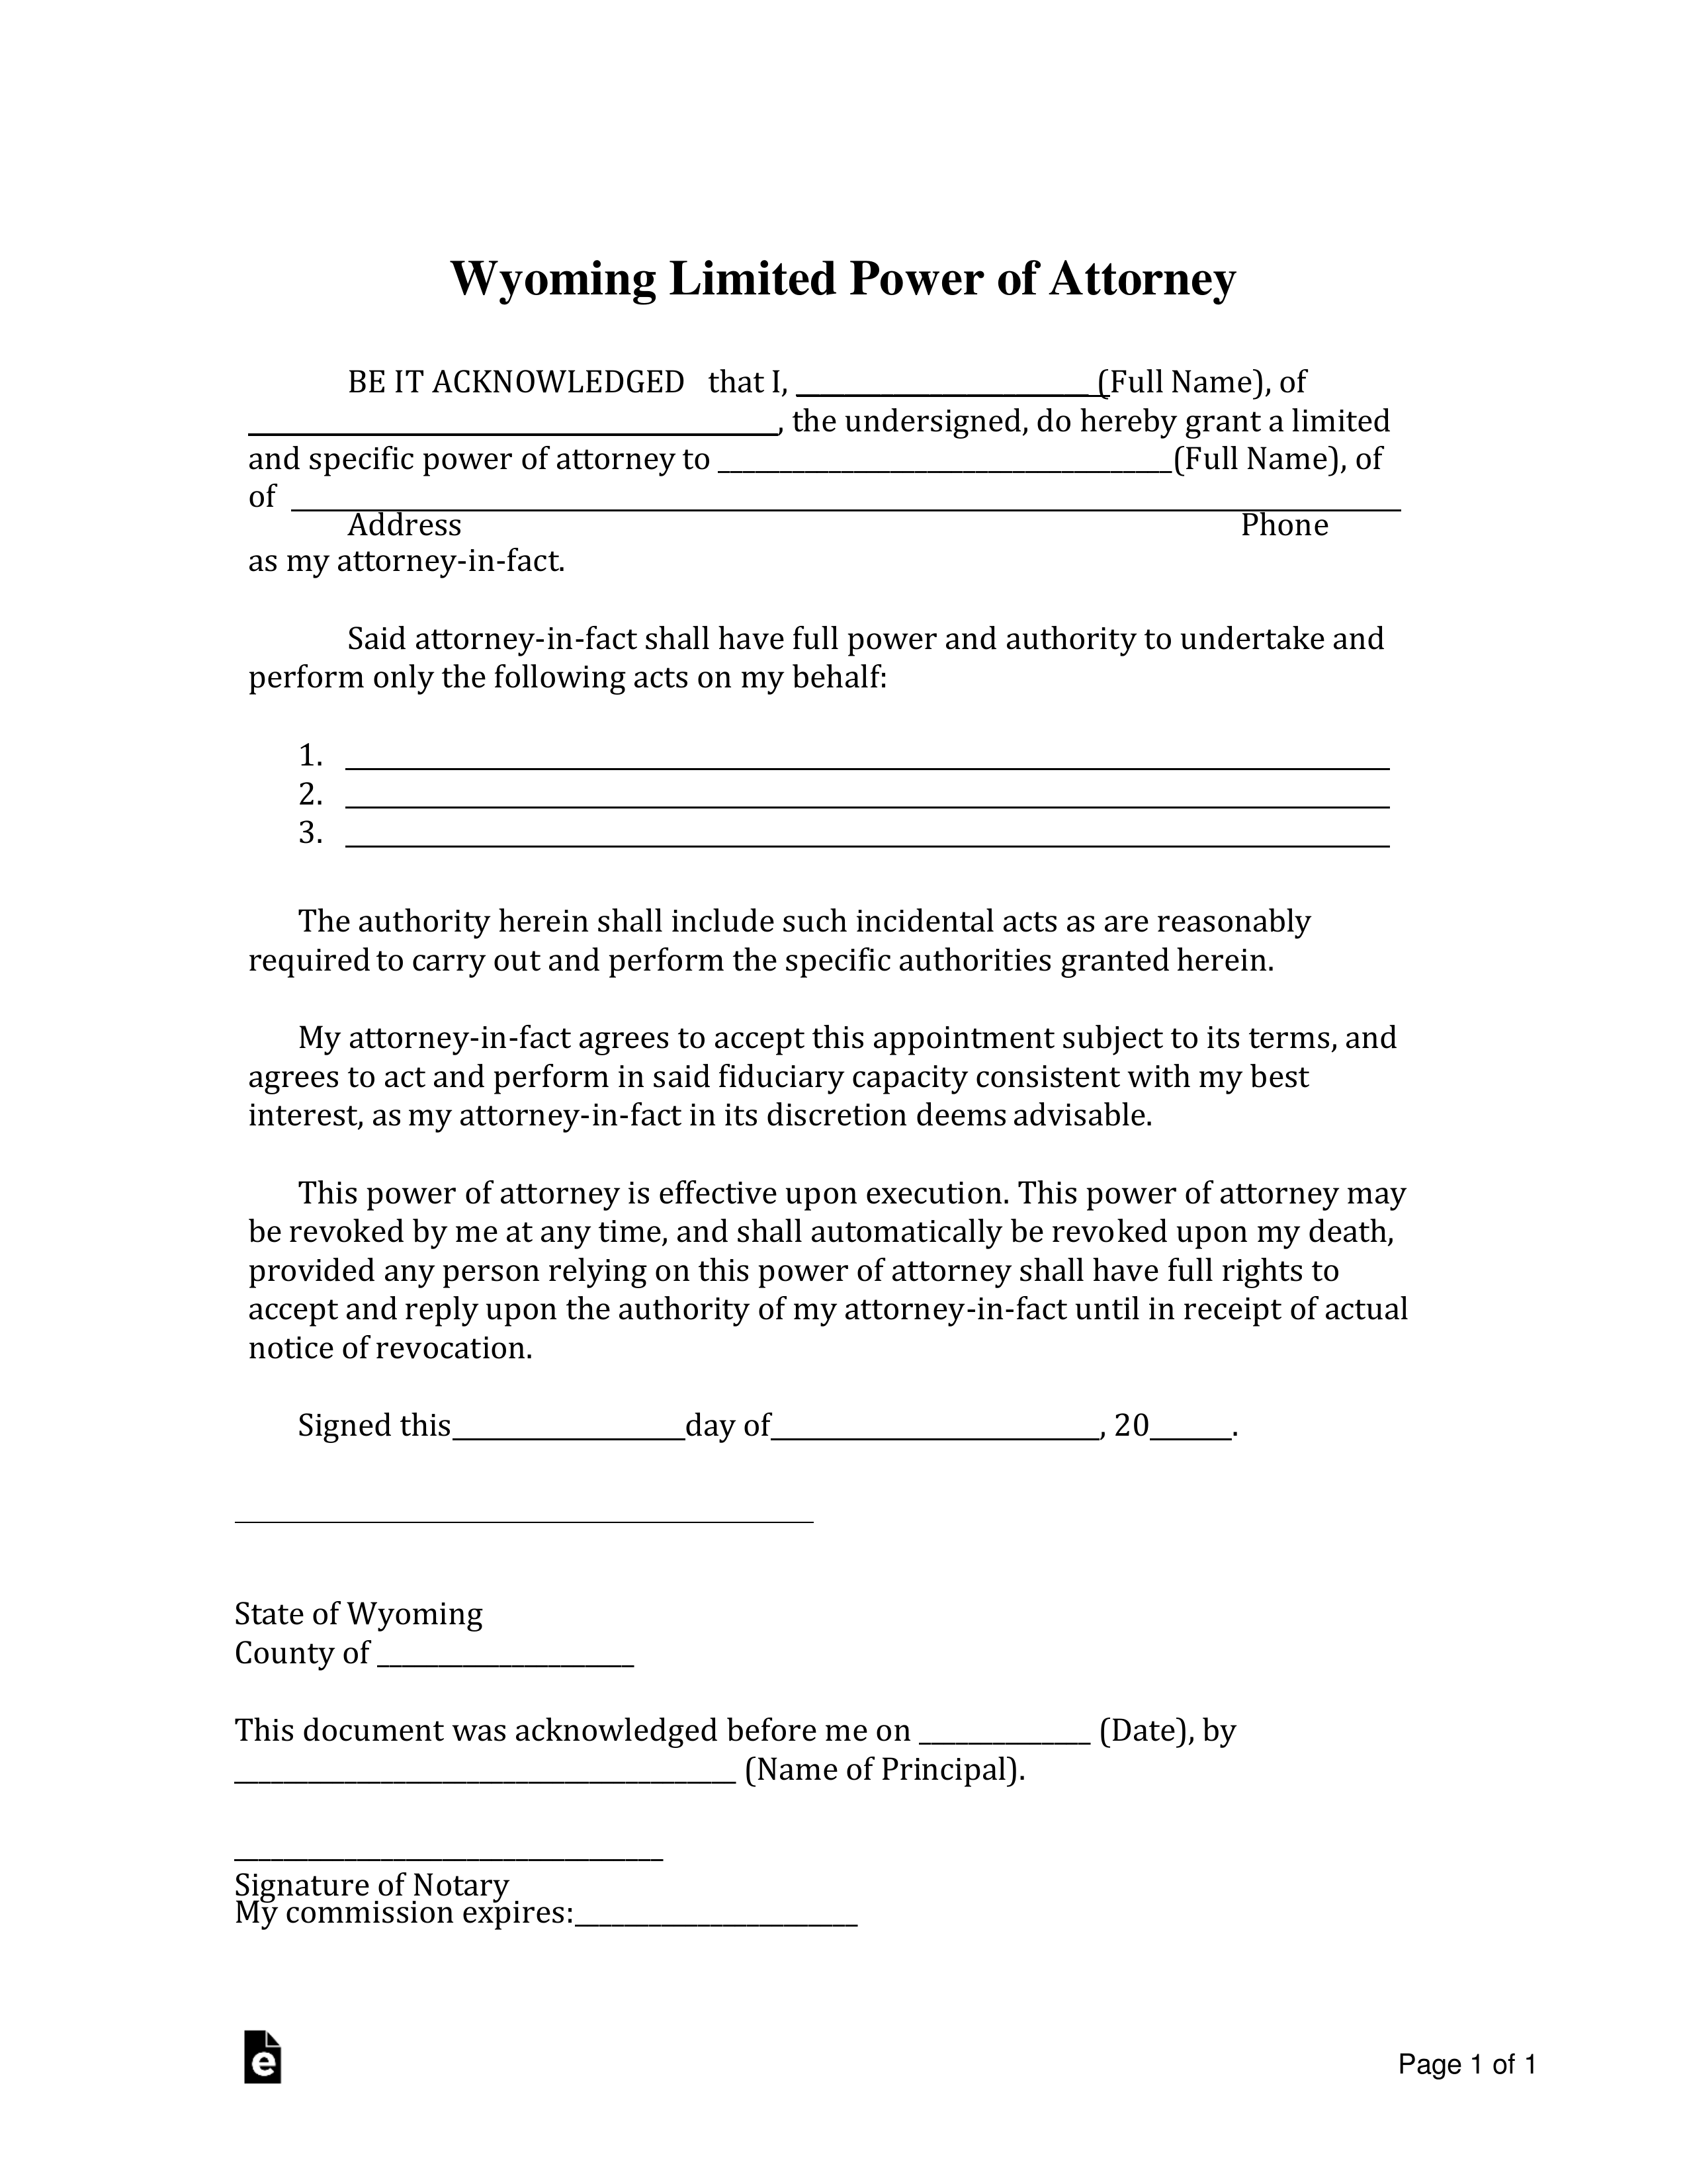 Wyoming Limited Power of Attorney Form